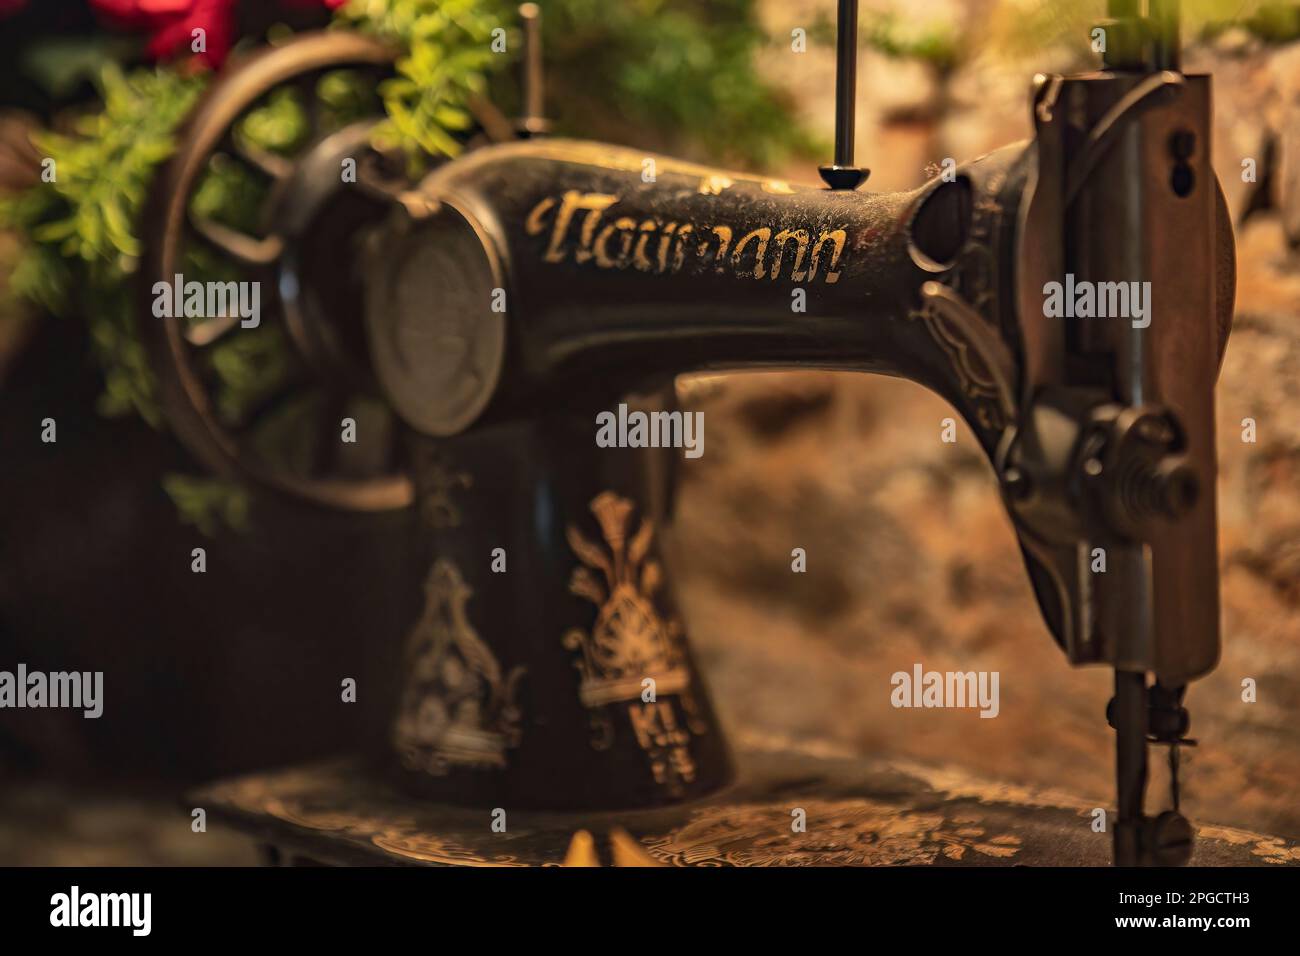 A vintage sewing machine, a testament to the Industrial Revolution, displaying intricate details and mechanical design Stock Photo